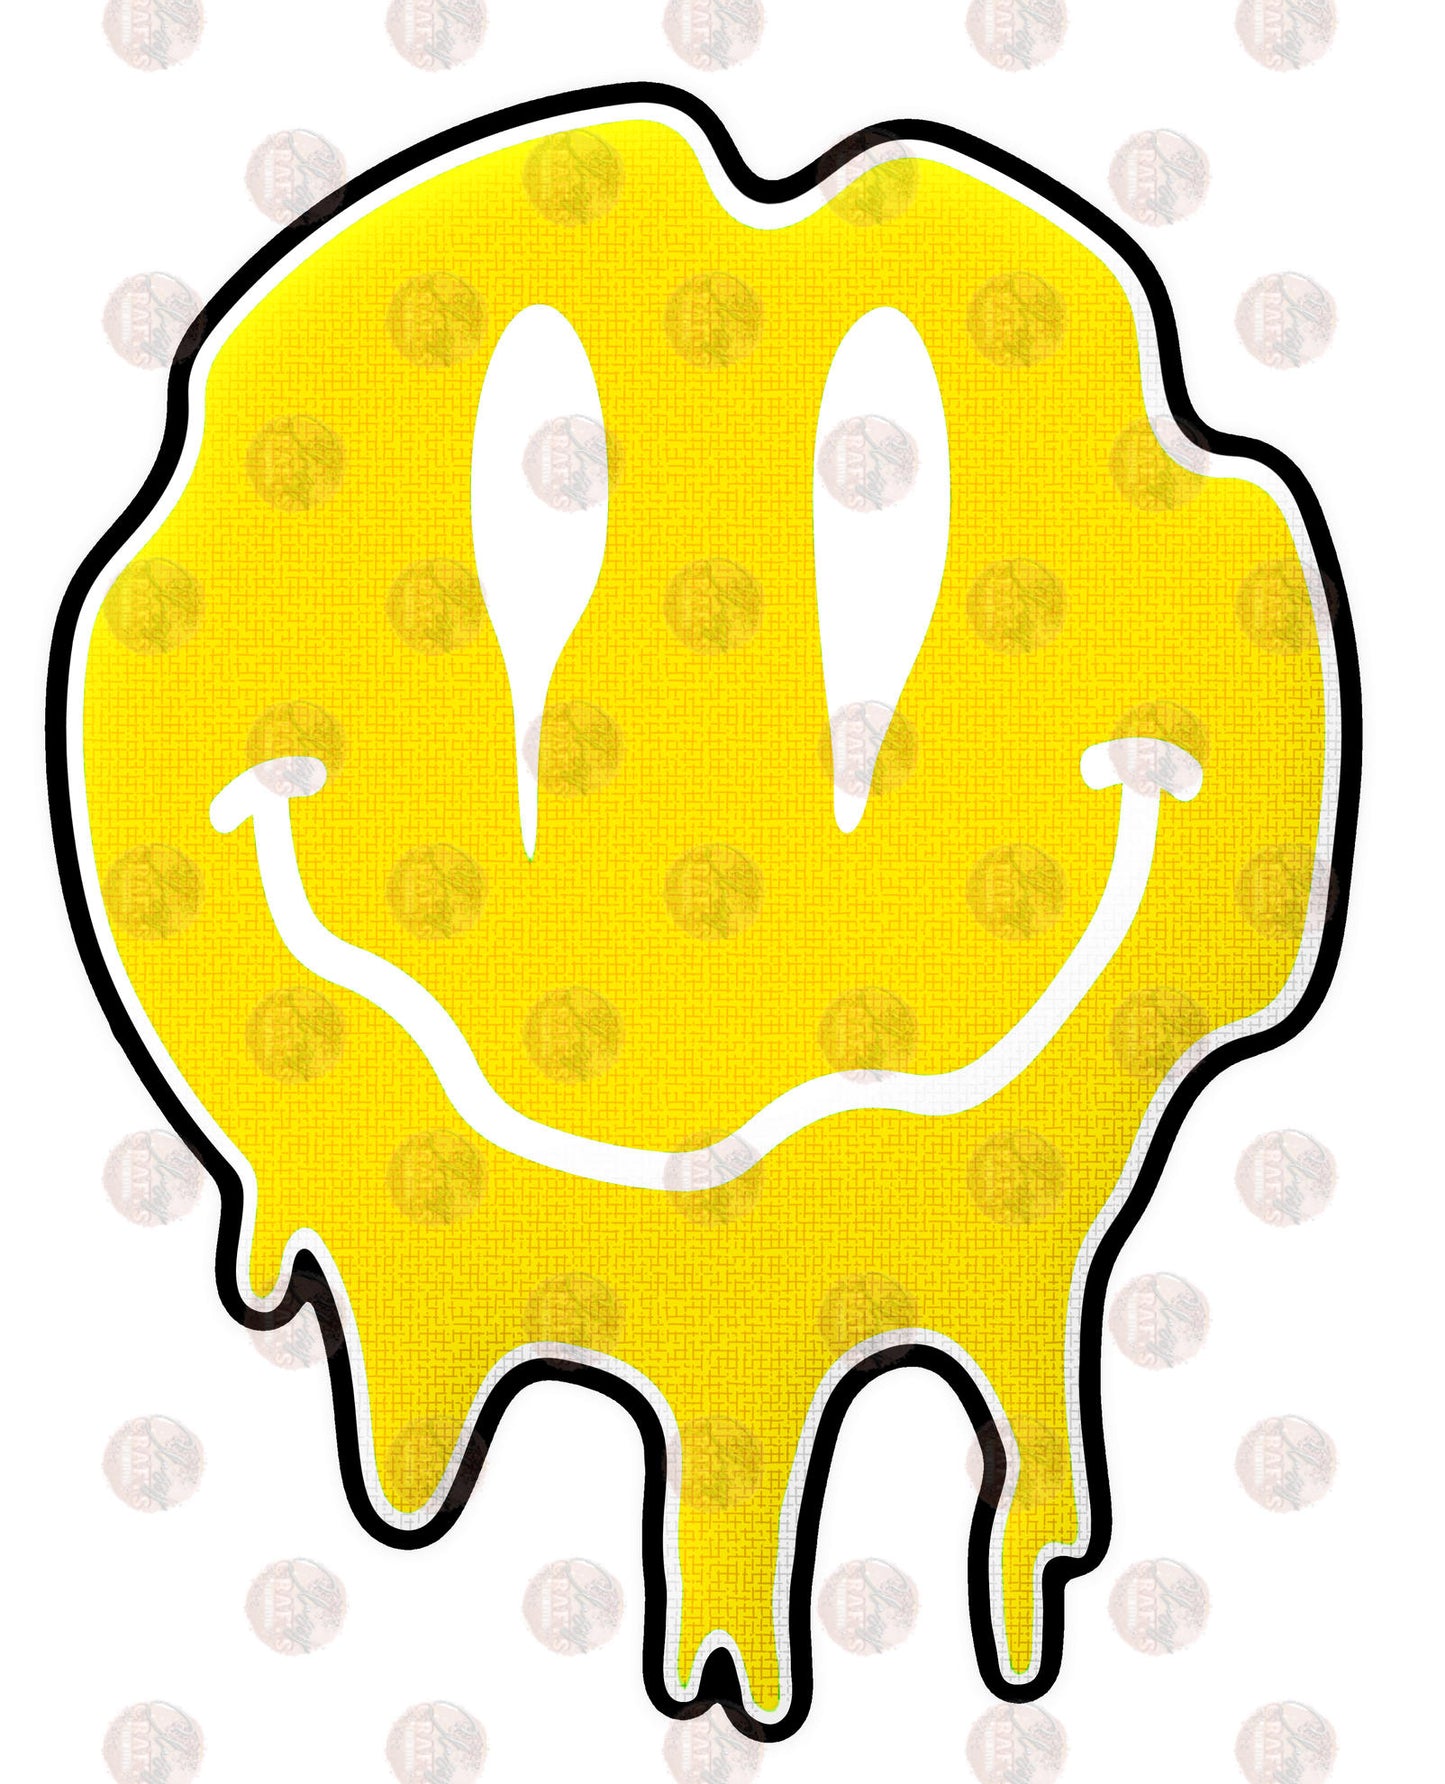 Smiley Drip Yellow & White - Sublimation Transfer